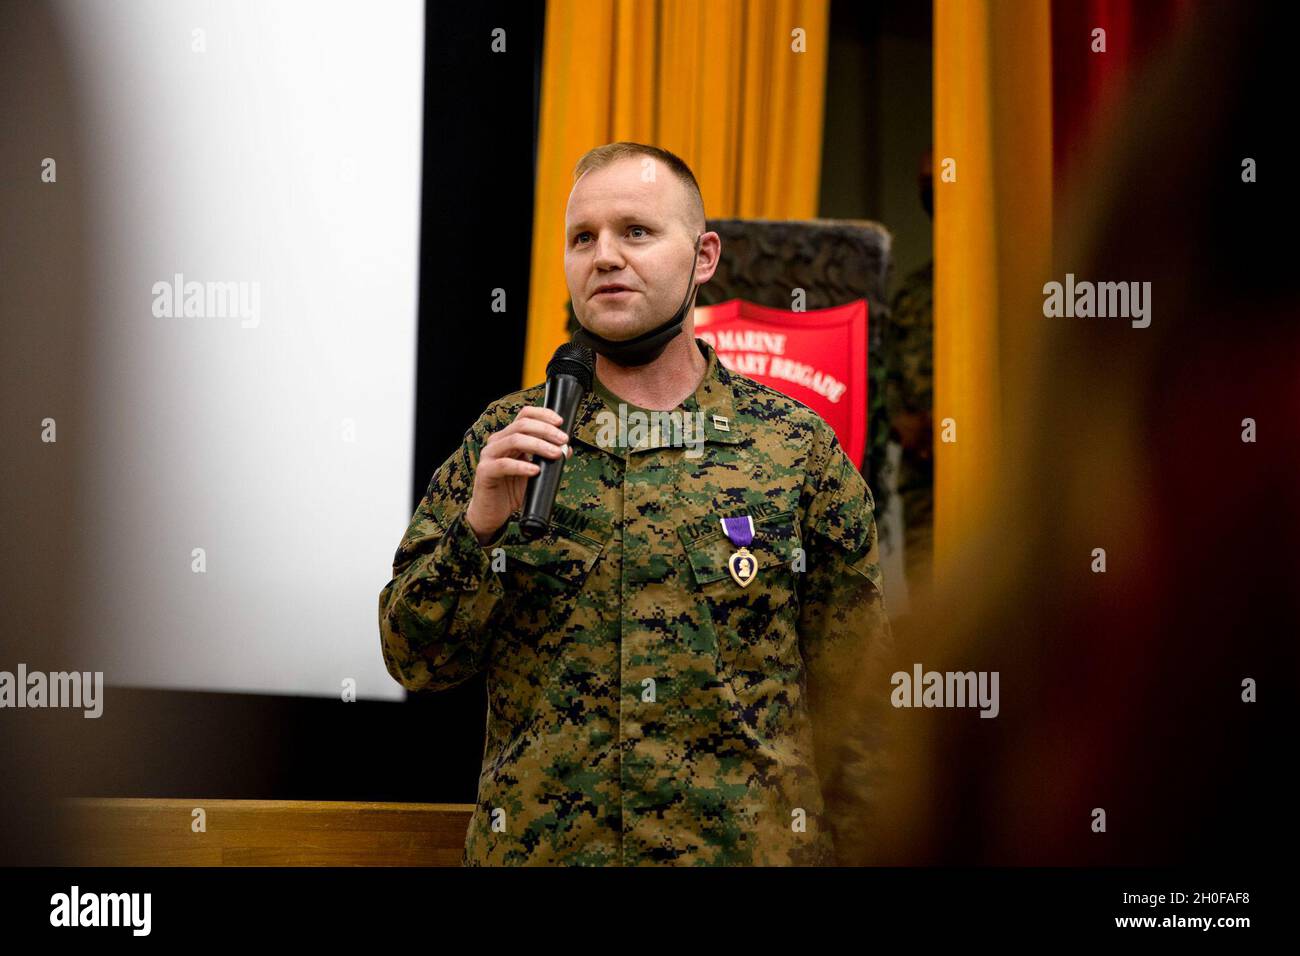 U.S. Marine Corps Capt. Kevin. W. Leishman, an Anti-Terrorism force protection officer, 3rd Marine Expeditionary Brigade, addresses the audience during a Purple Heart ceremony at the base theater, Camp Courtney, Okinawa, Japan, Feb. 24, 2021. During the ceremony Leishman was awarded for wounds sustained in action against enemies of the United States 16 years ago during the Battle of Fallujah, Operation Phantom Fury, Operation Iraqi Freedom. Stock Photo